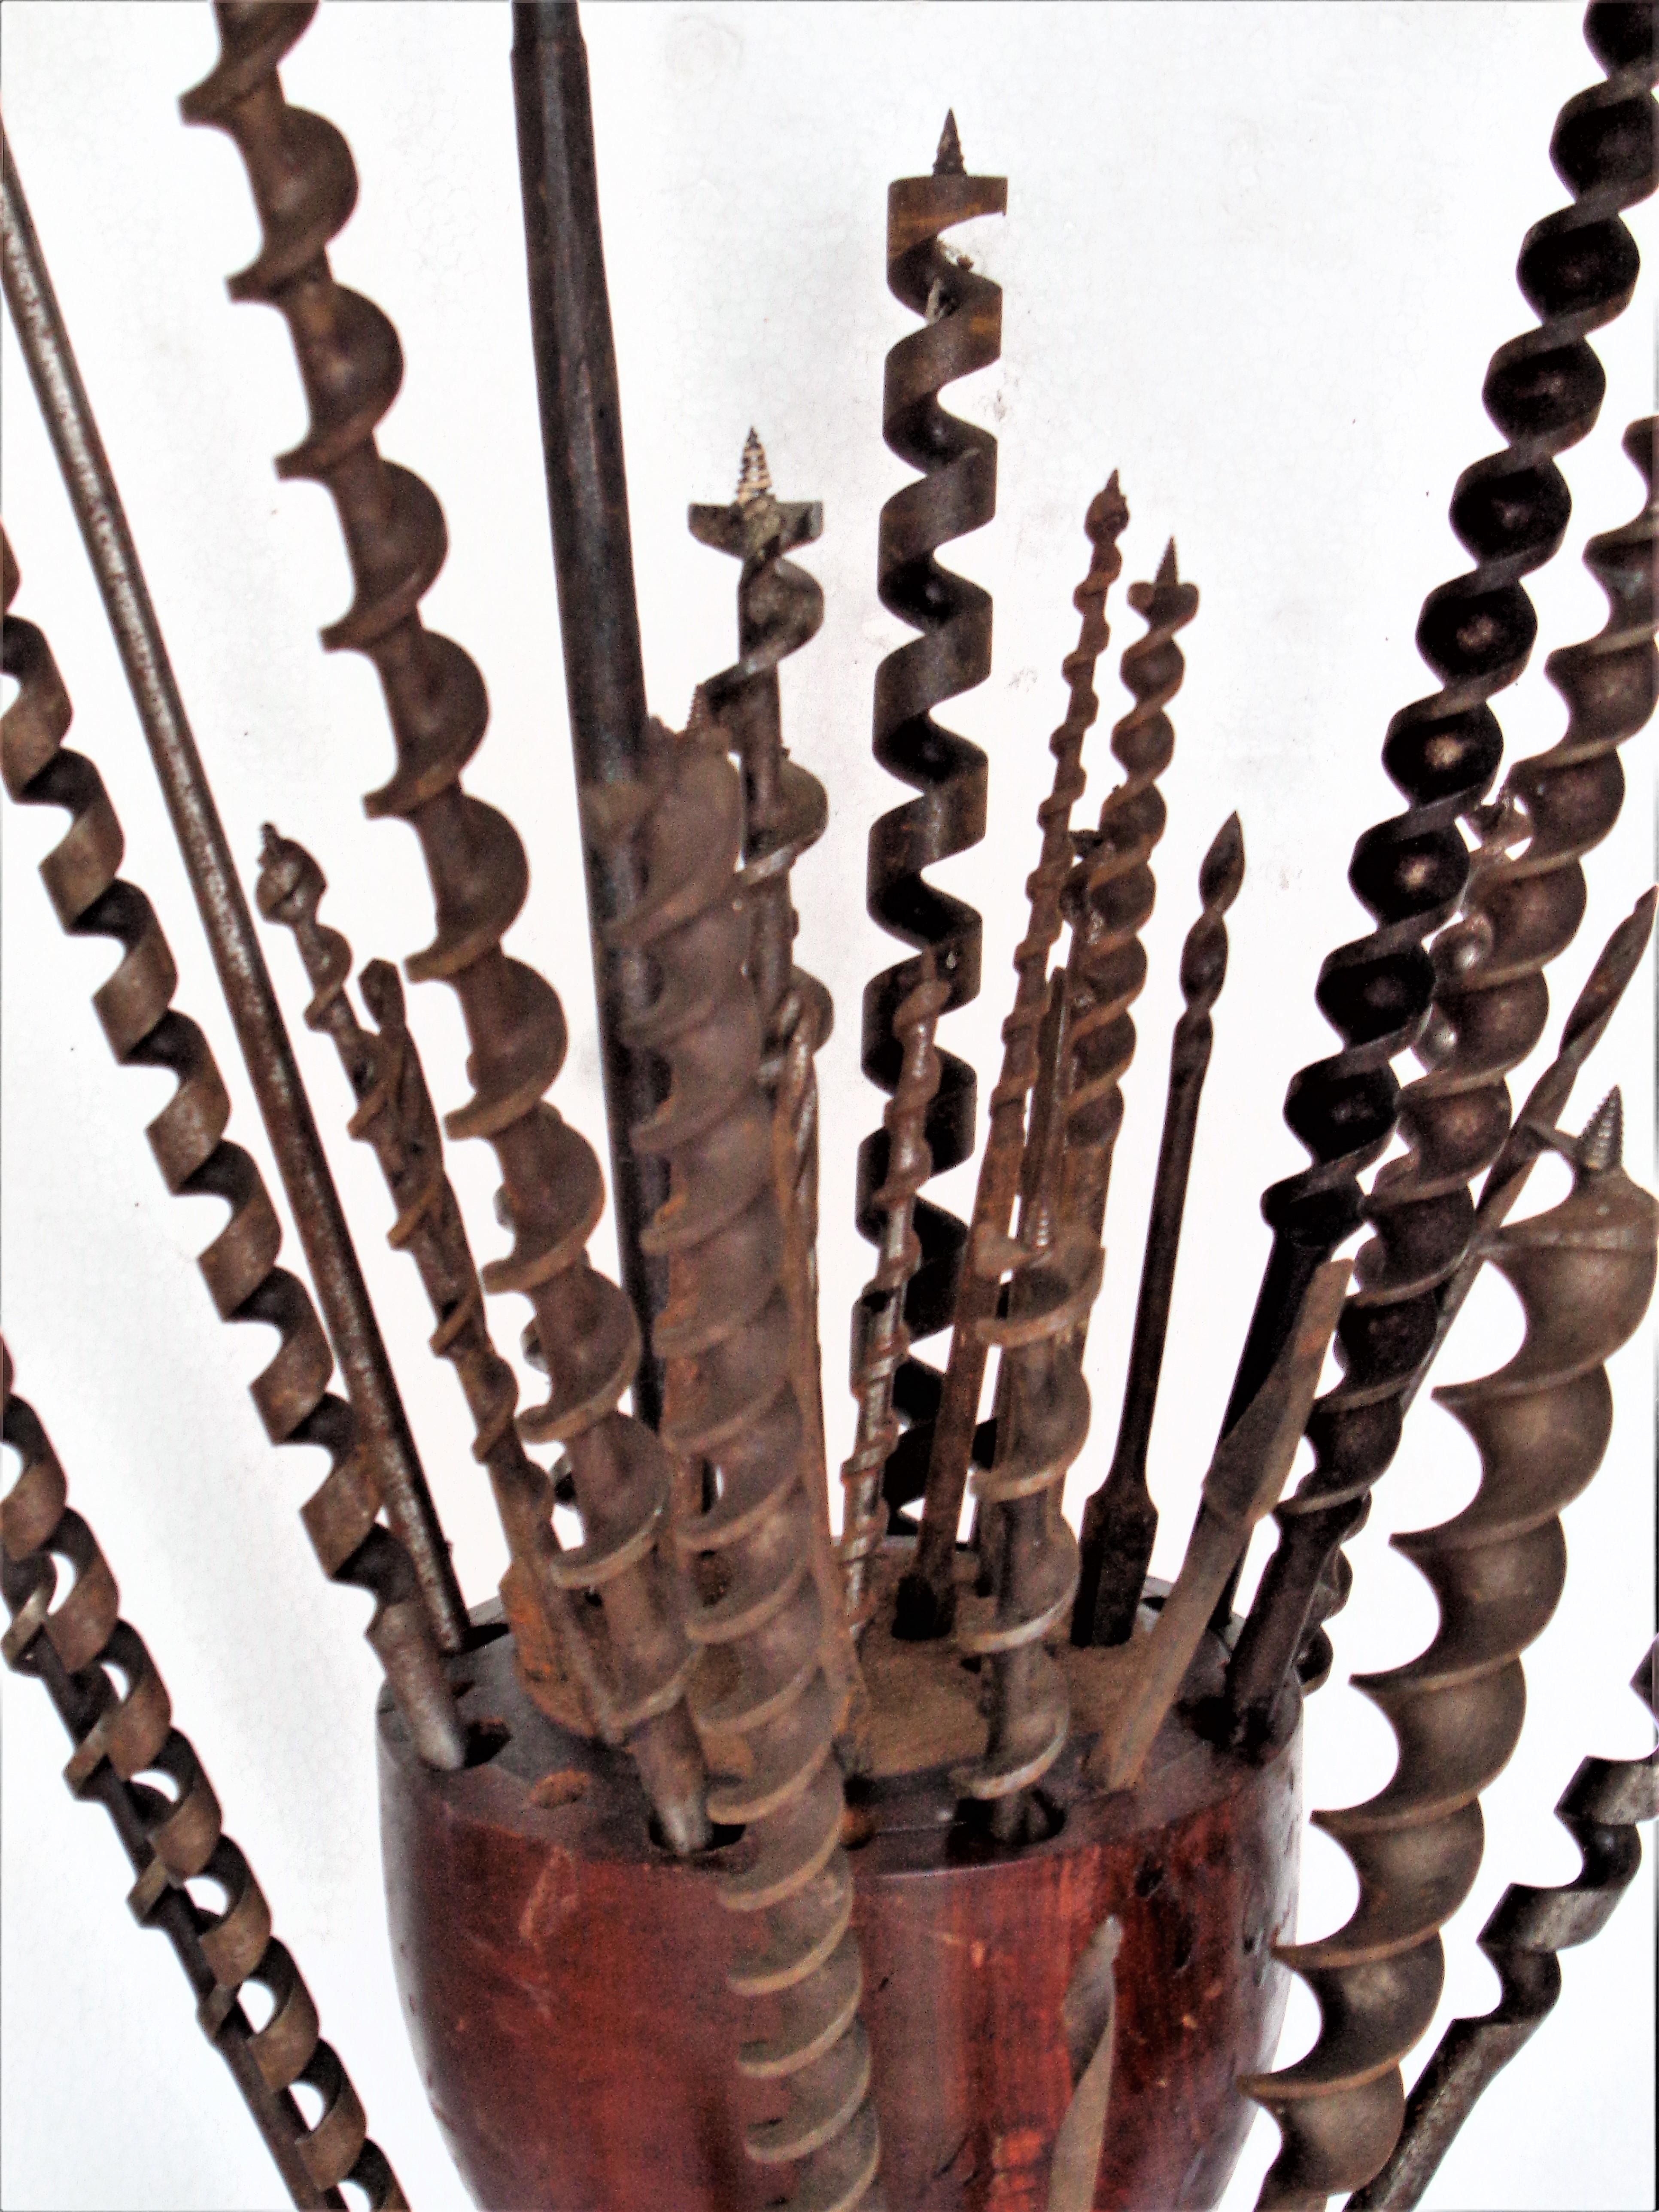 Antique Drill Bit Holder & Drill Bits, As Found Industrial Sculpture For Sale 5